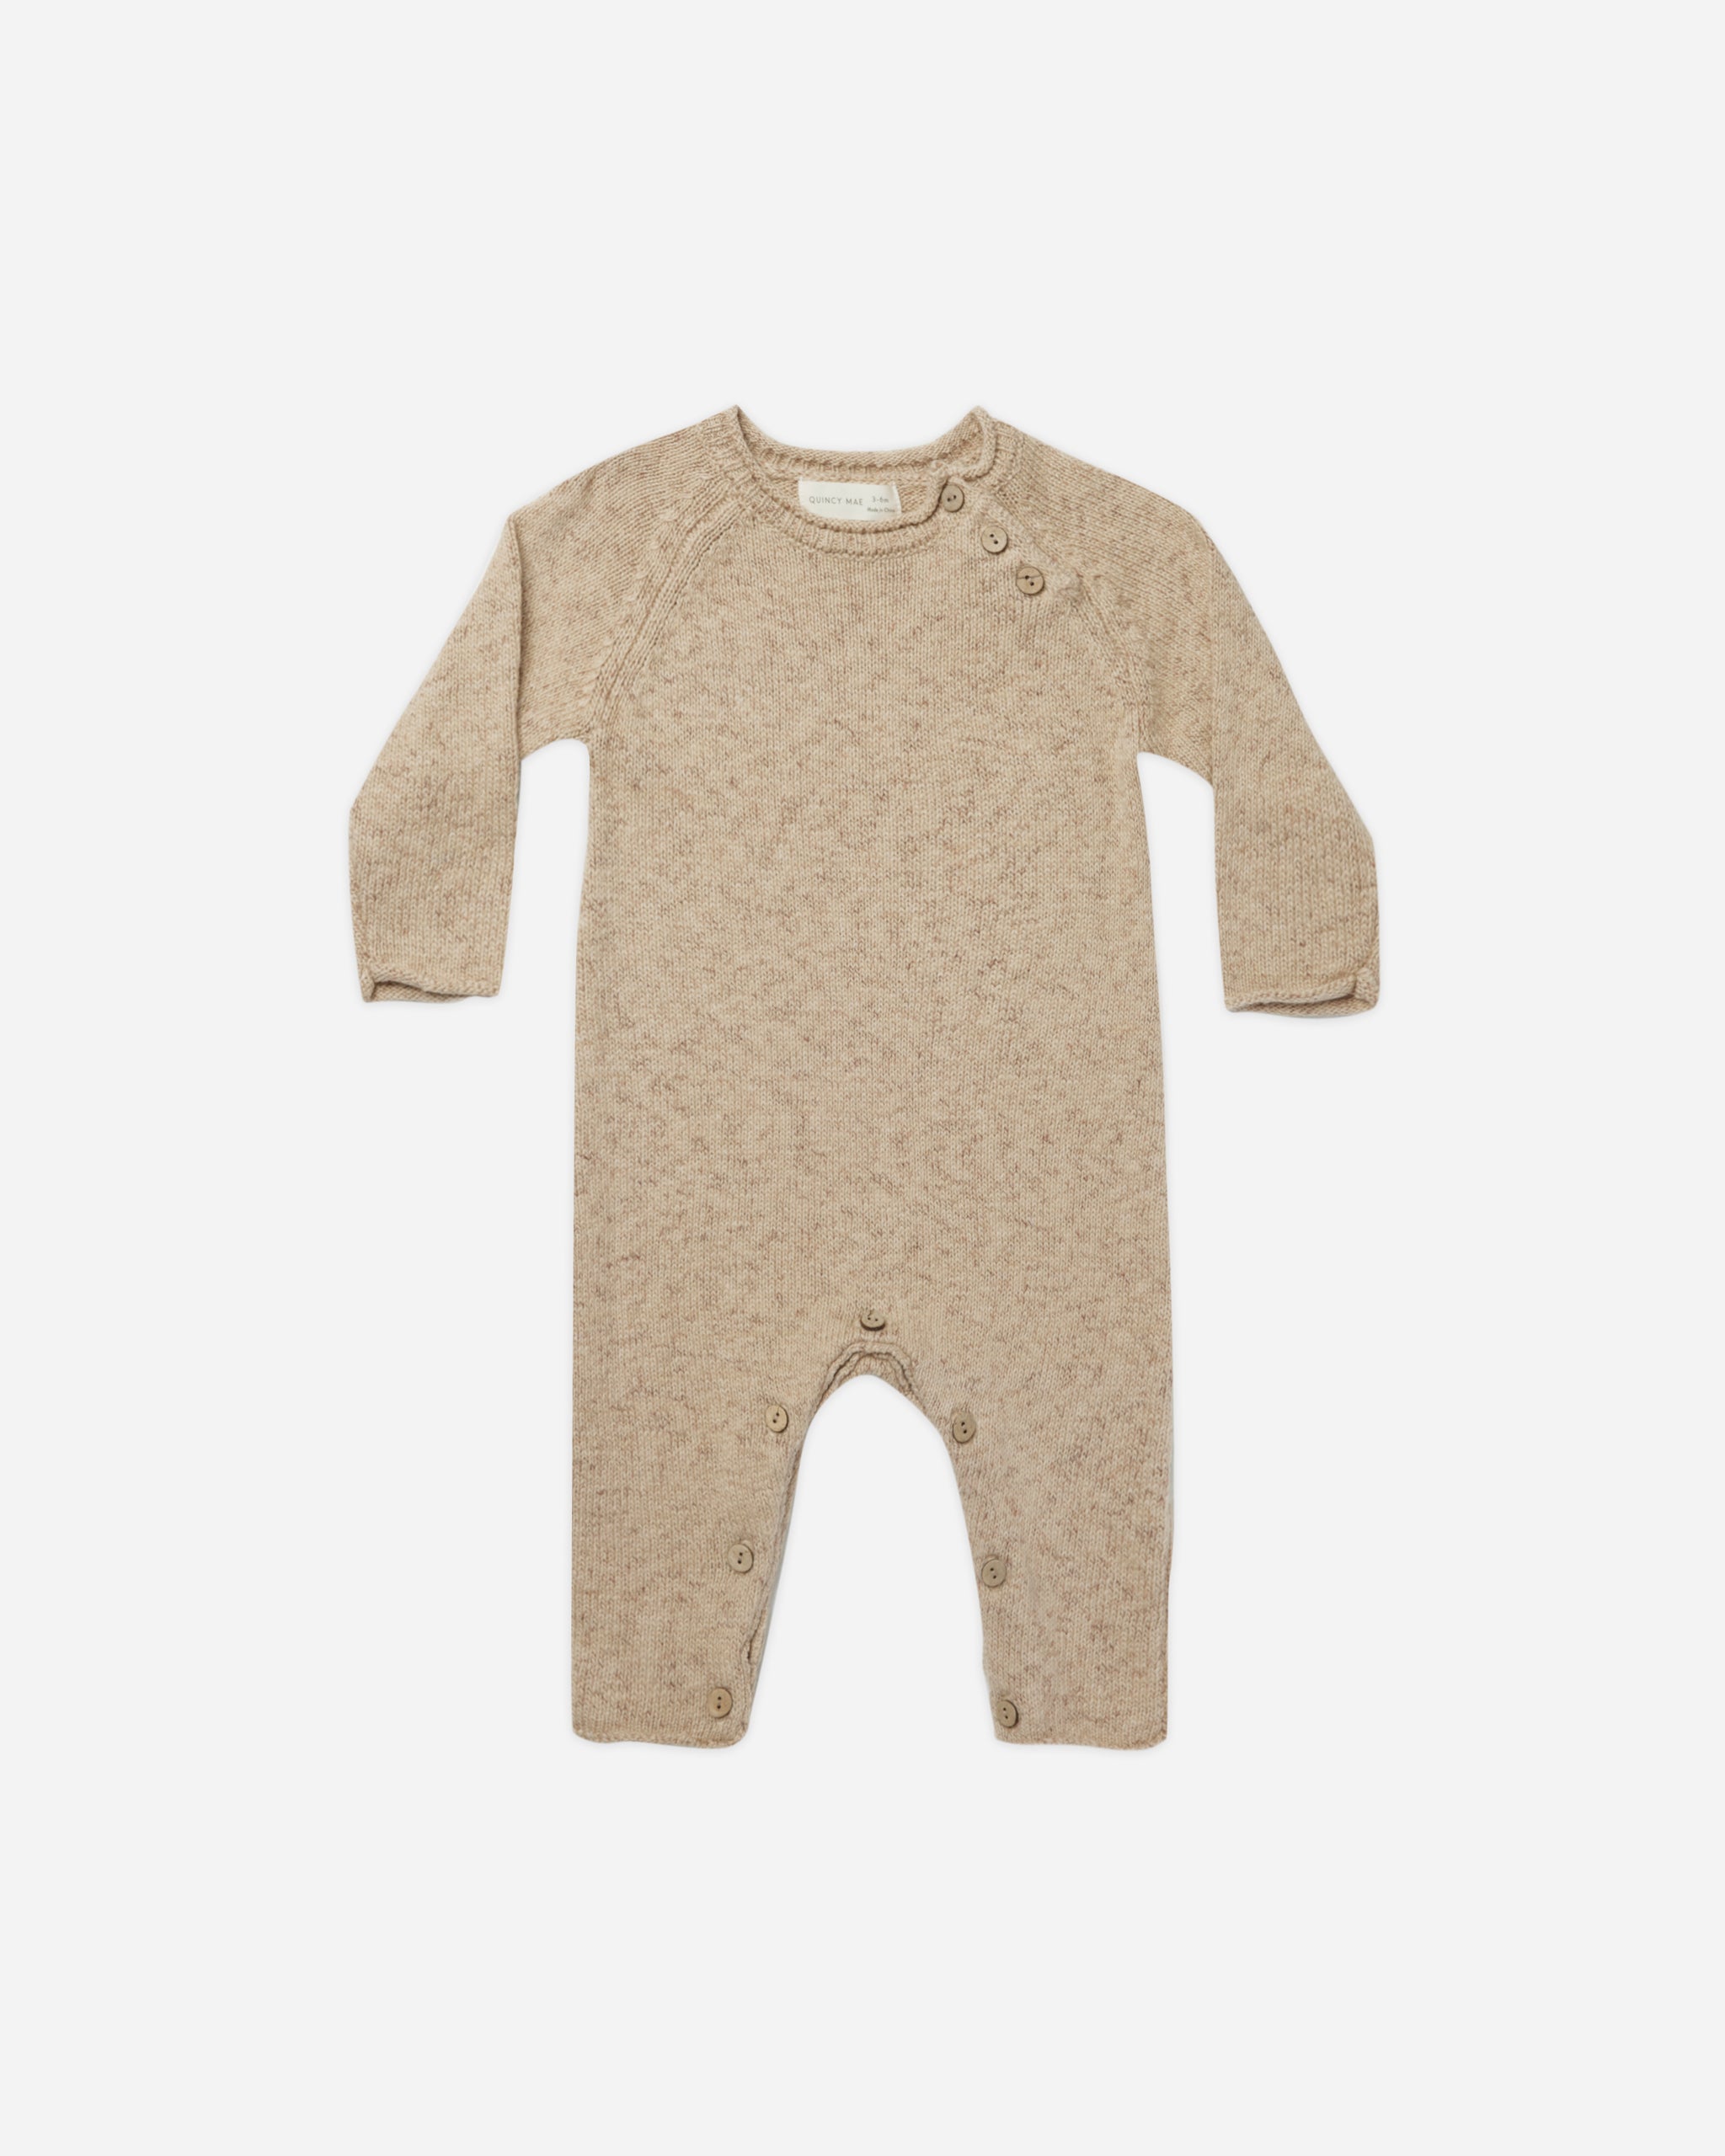 Speckled Knit Jumpsuit || Latte - Rylee + Cru | Kids Clothes | Trendy Baby Clothes | Modern Infant Outfits |